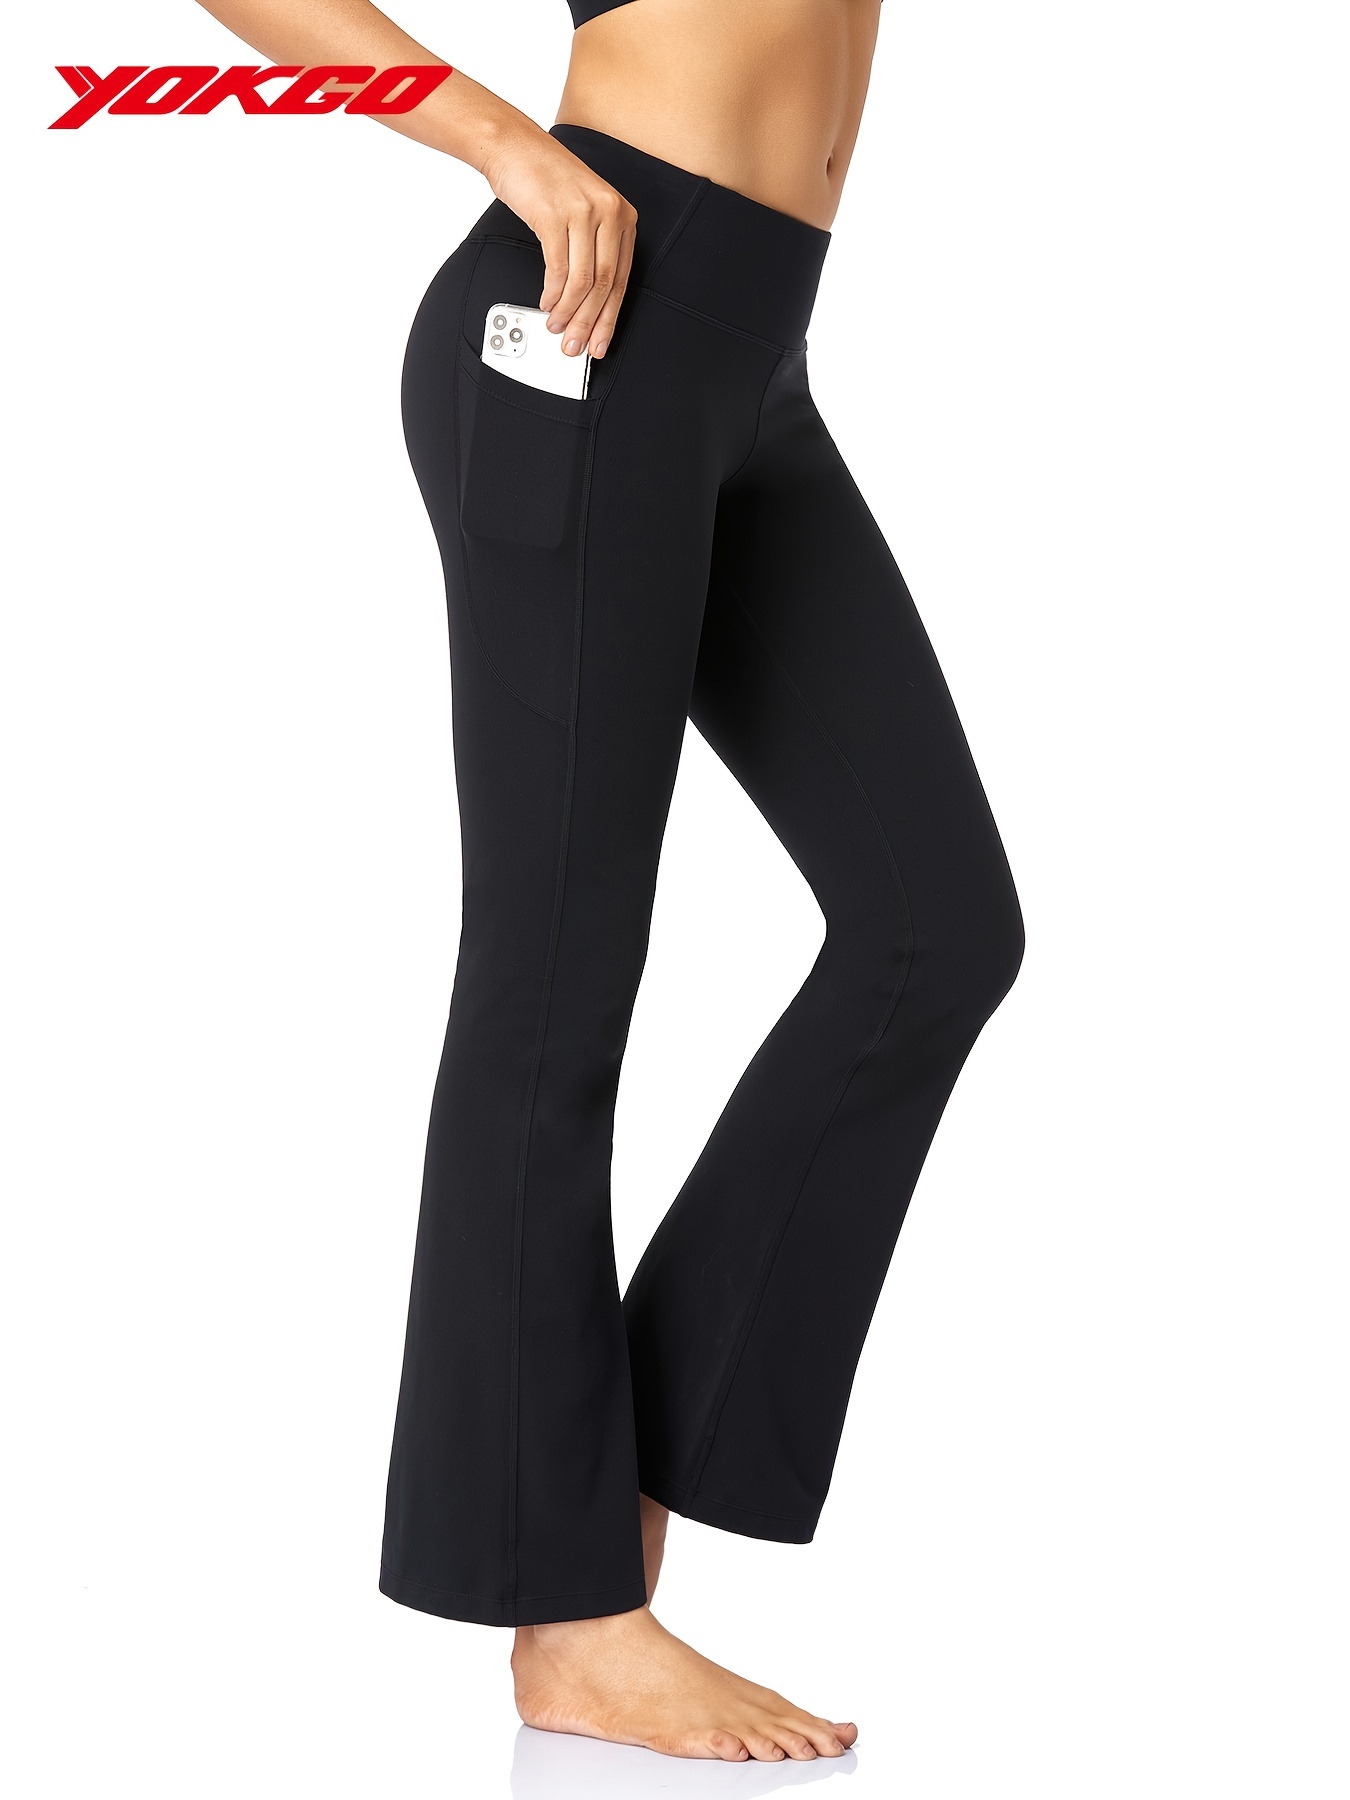 Women Bootcut Yoga Pants Bootleg Flared Trousers Casual Fitness